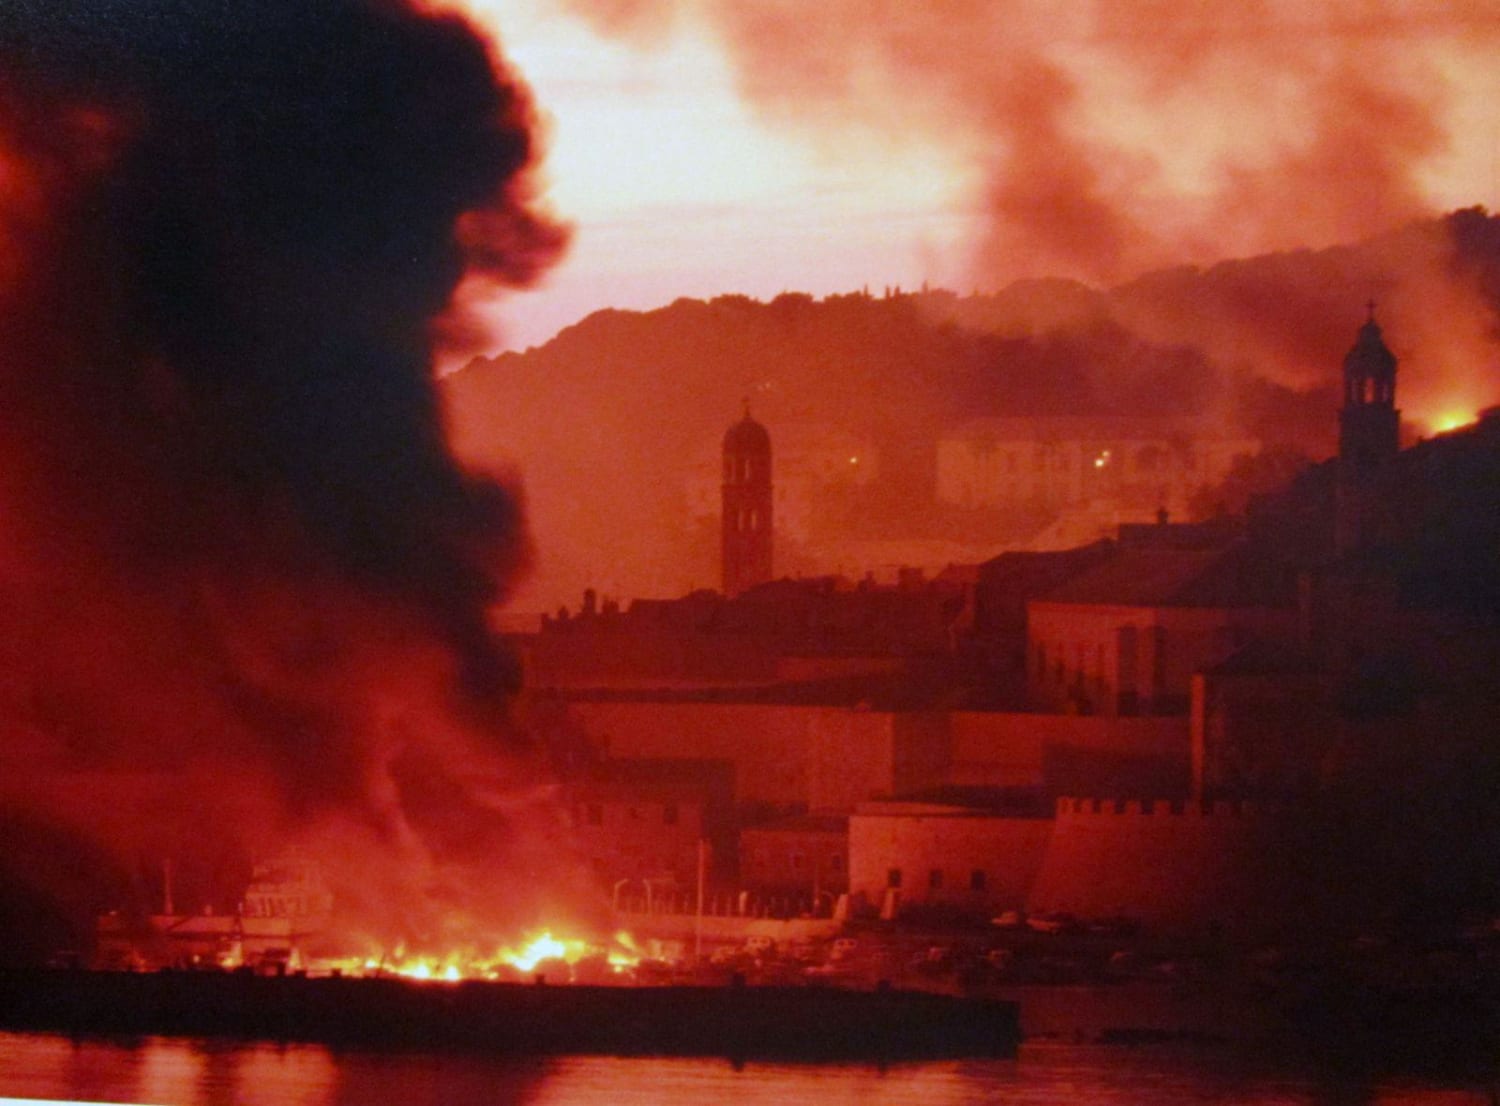 UNESCO world heritage site, city of Dubrovnik in Croatia, being bombed by Yugoslav army during their unsuccessful siege of the city at the begining of the Croatian War of Independence in 1991